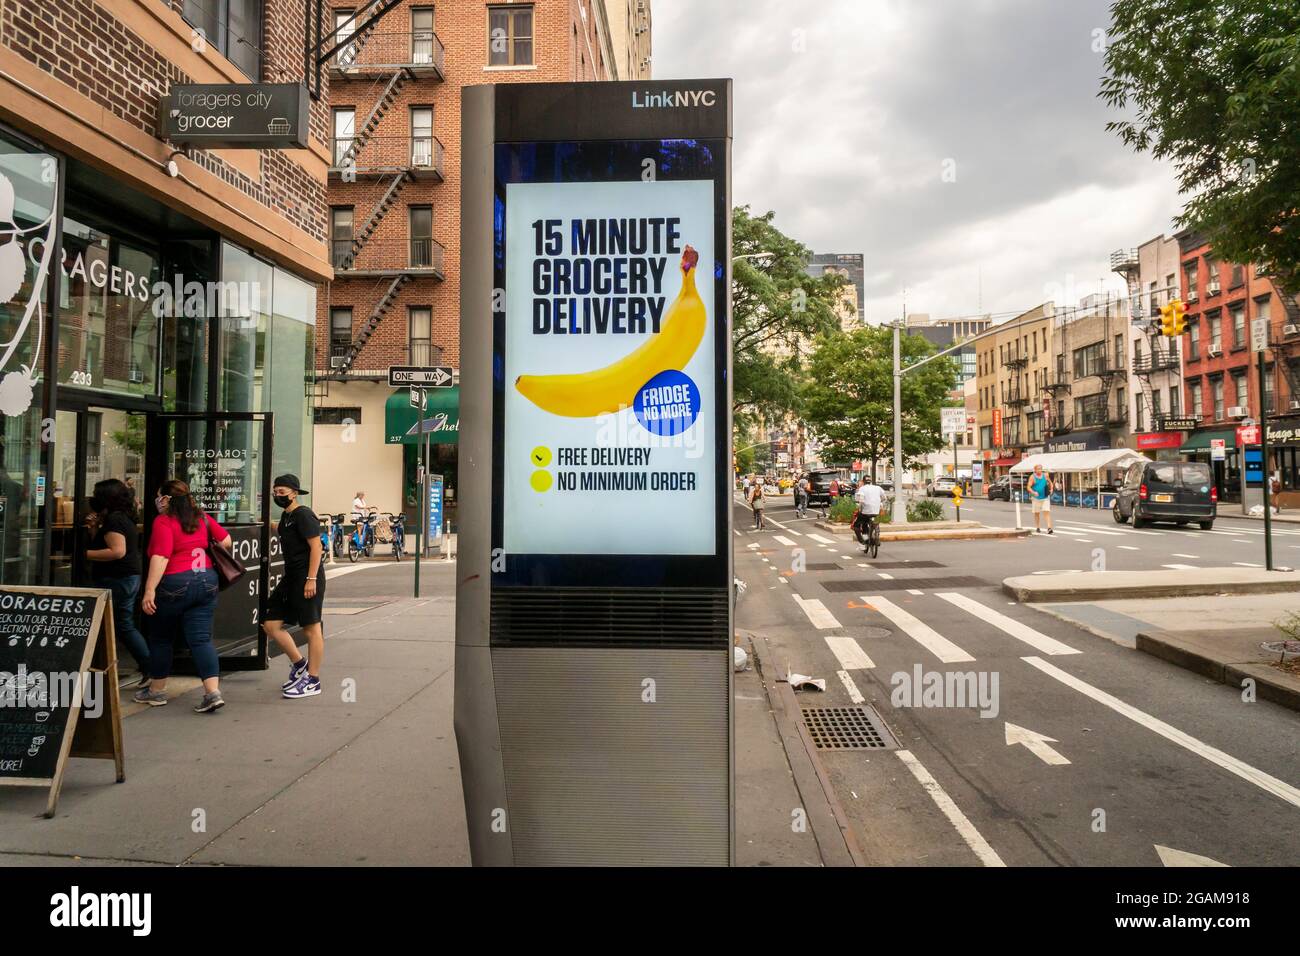 Advertising for the superfast grocery delivery service Fridge No More on a LinkNYC kiosk in the Chelsea neighborhood of New York on Friday, July 23, 2021. Fridge No More and its competitors 1520mins and Jokr hqve been heavily advertising. (© Richard B. Levine) Stock Photo